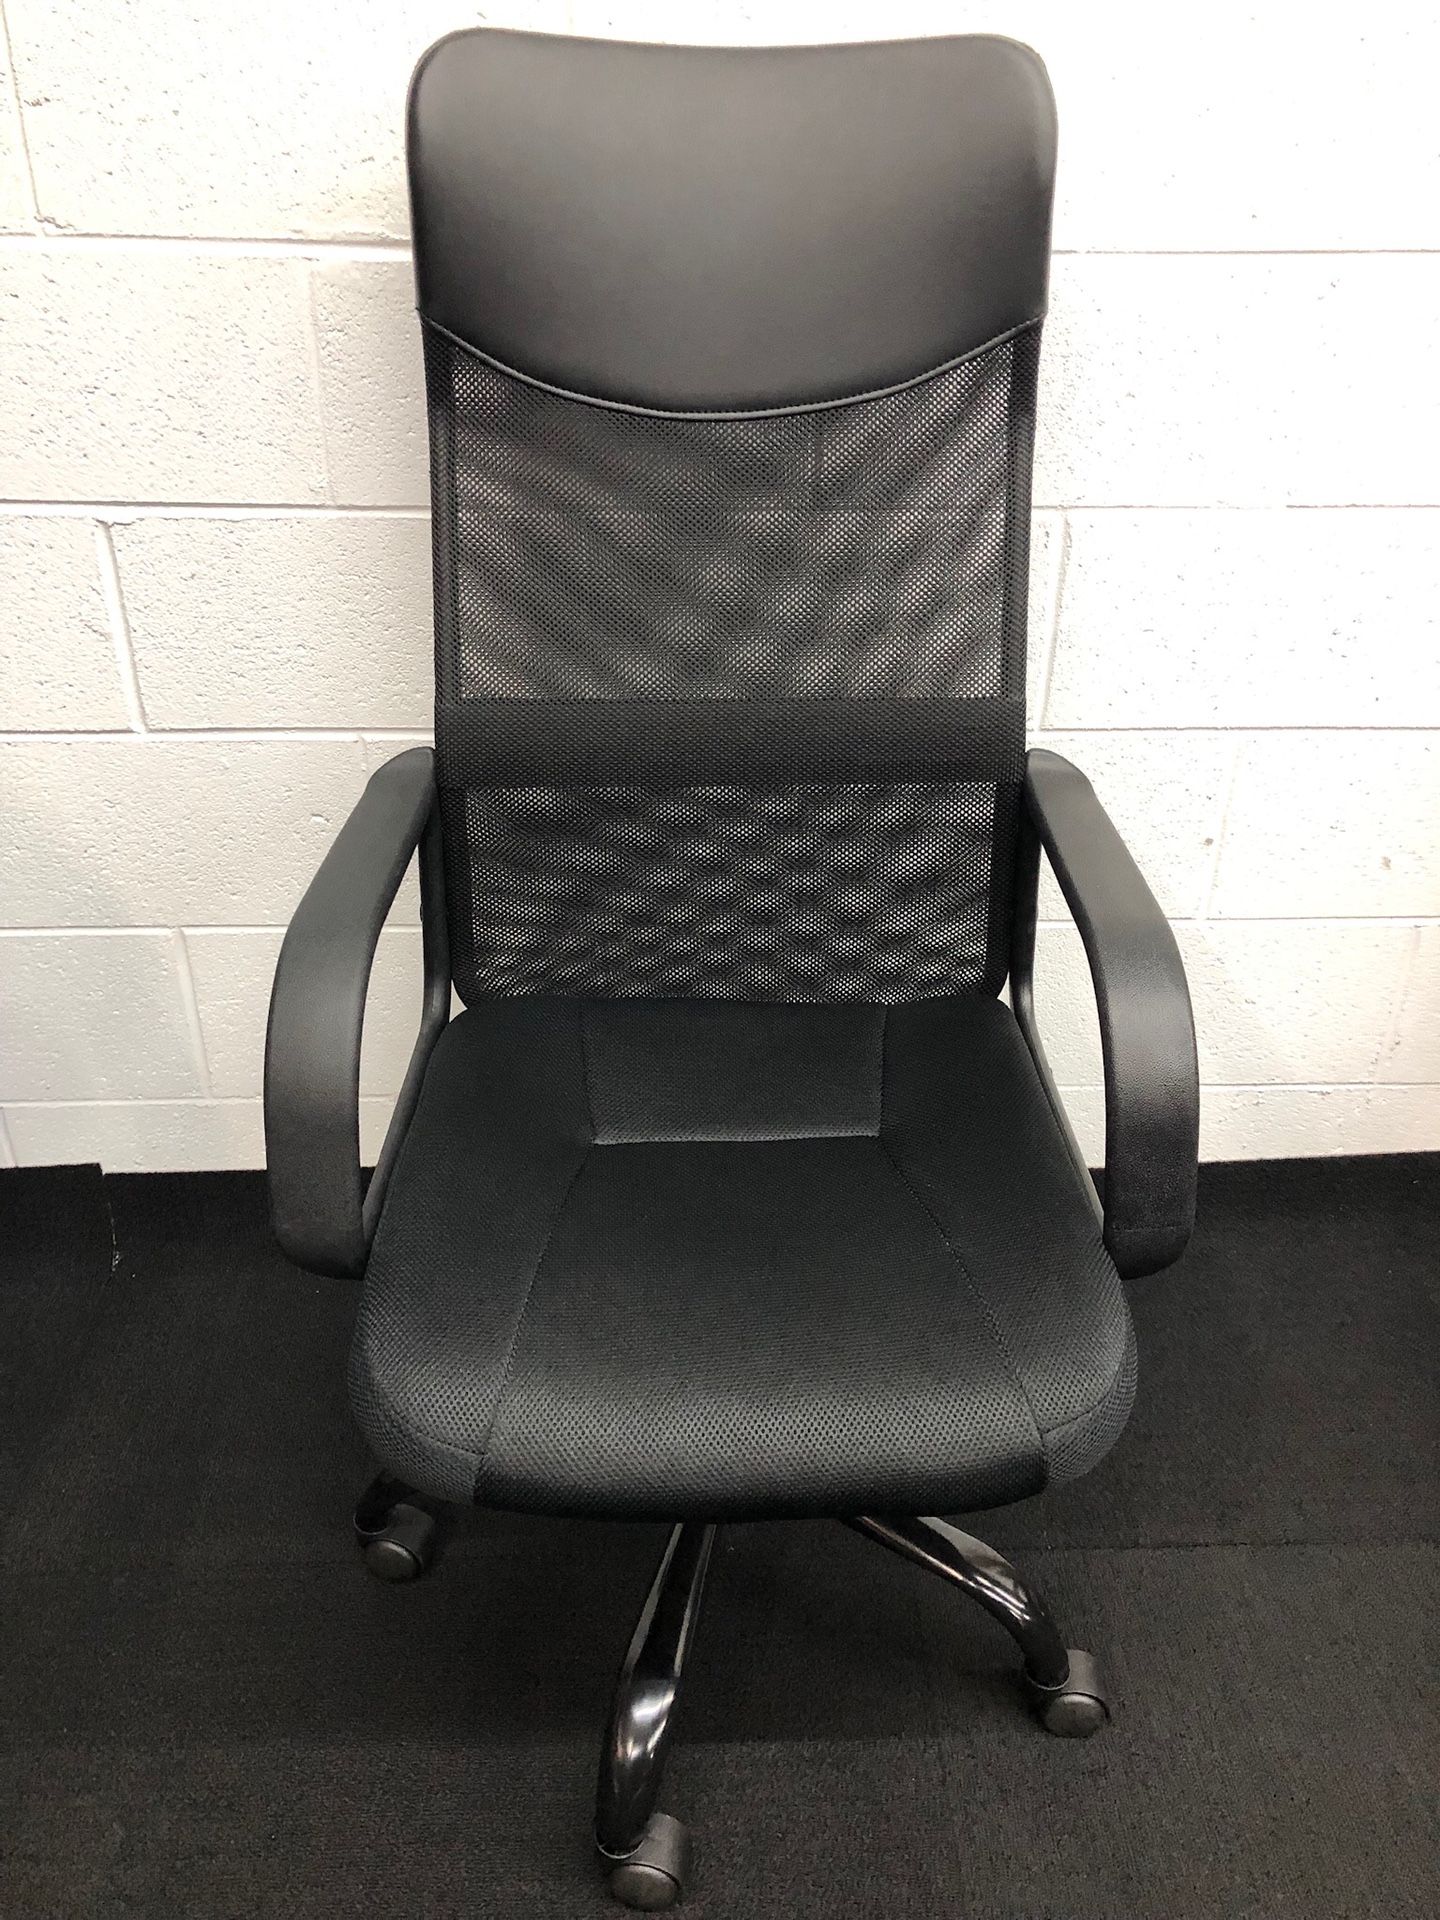 BRAND NEW BLACK ADJUSTABLE EXECUTIVE OFFICE CHAIR